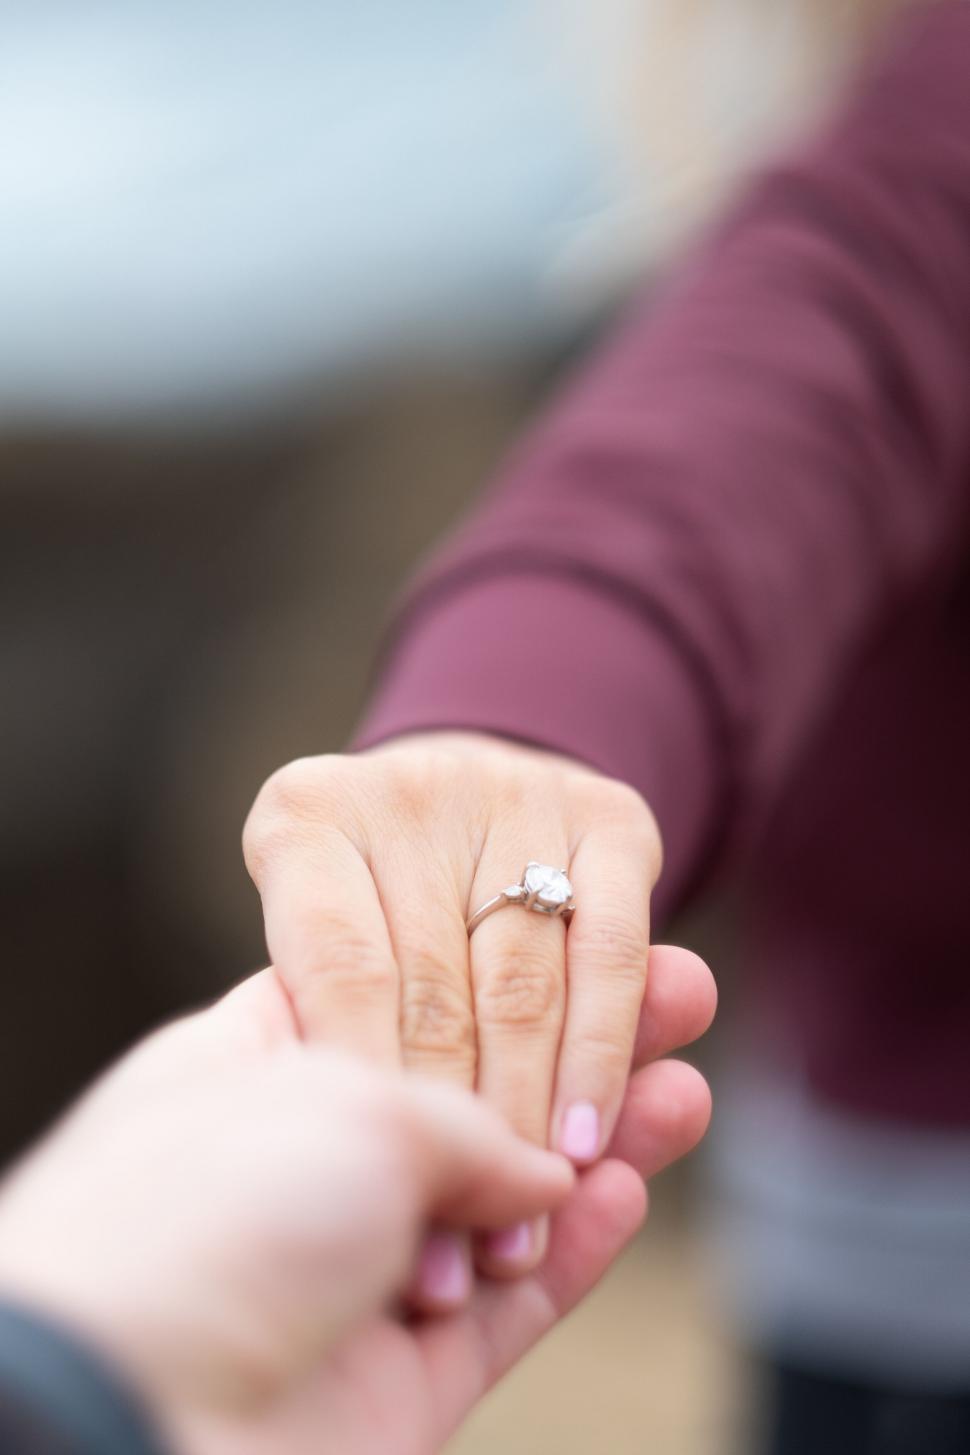 Free Image of Hand displaying an engagement ring in a proposal gesture 